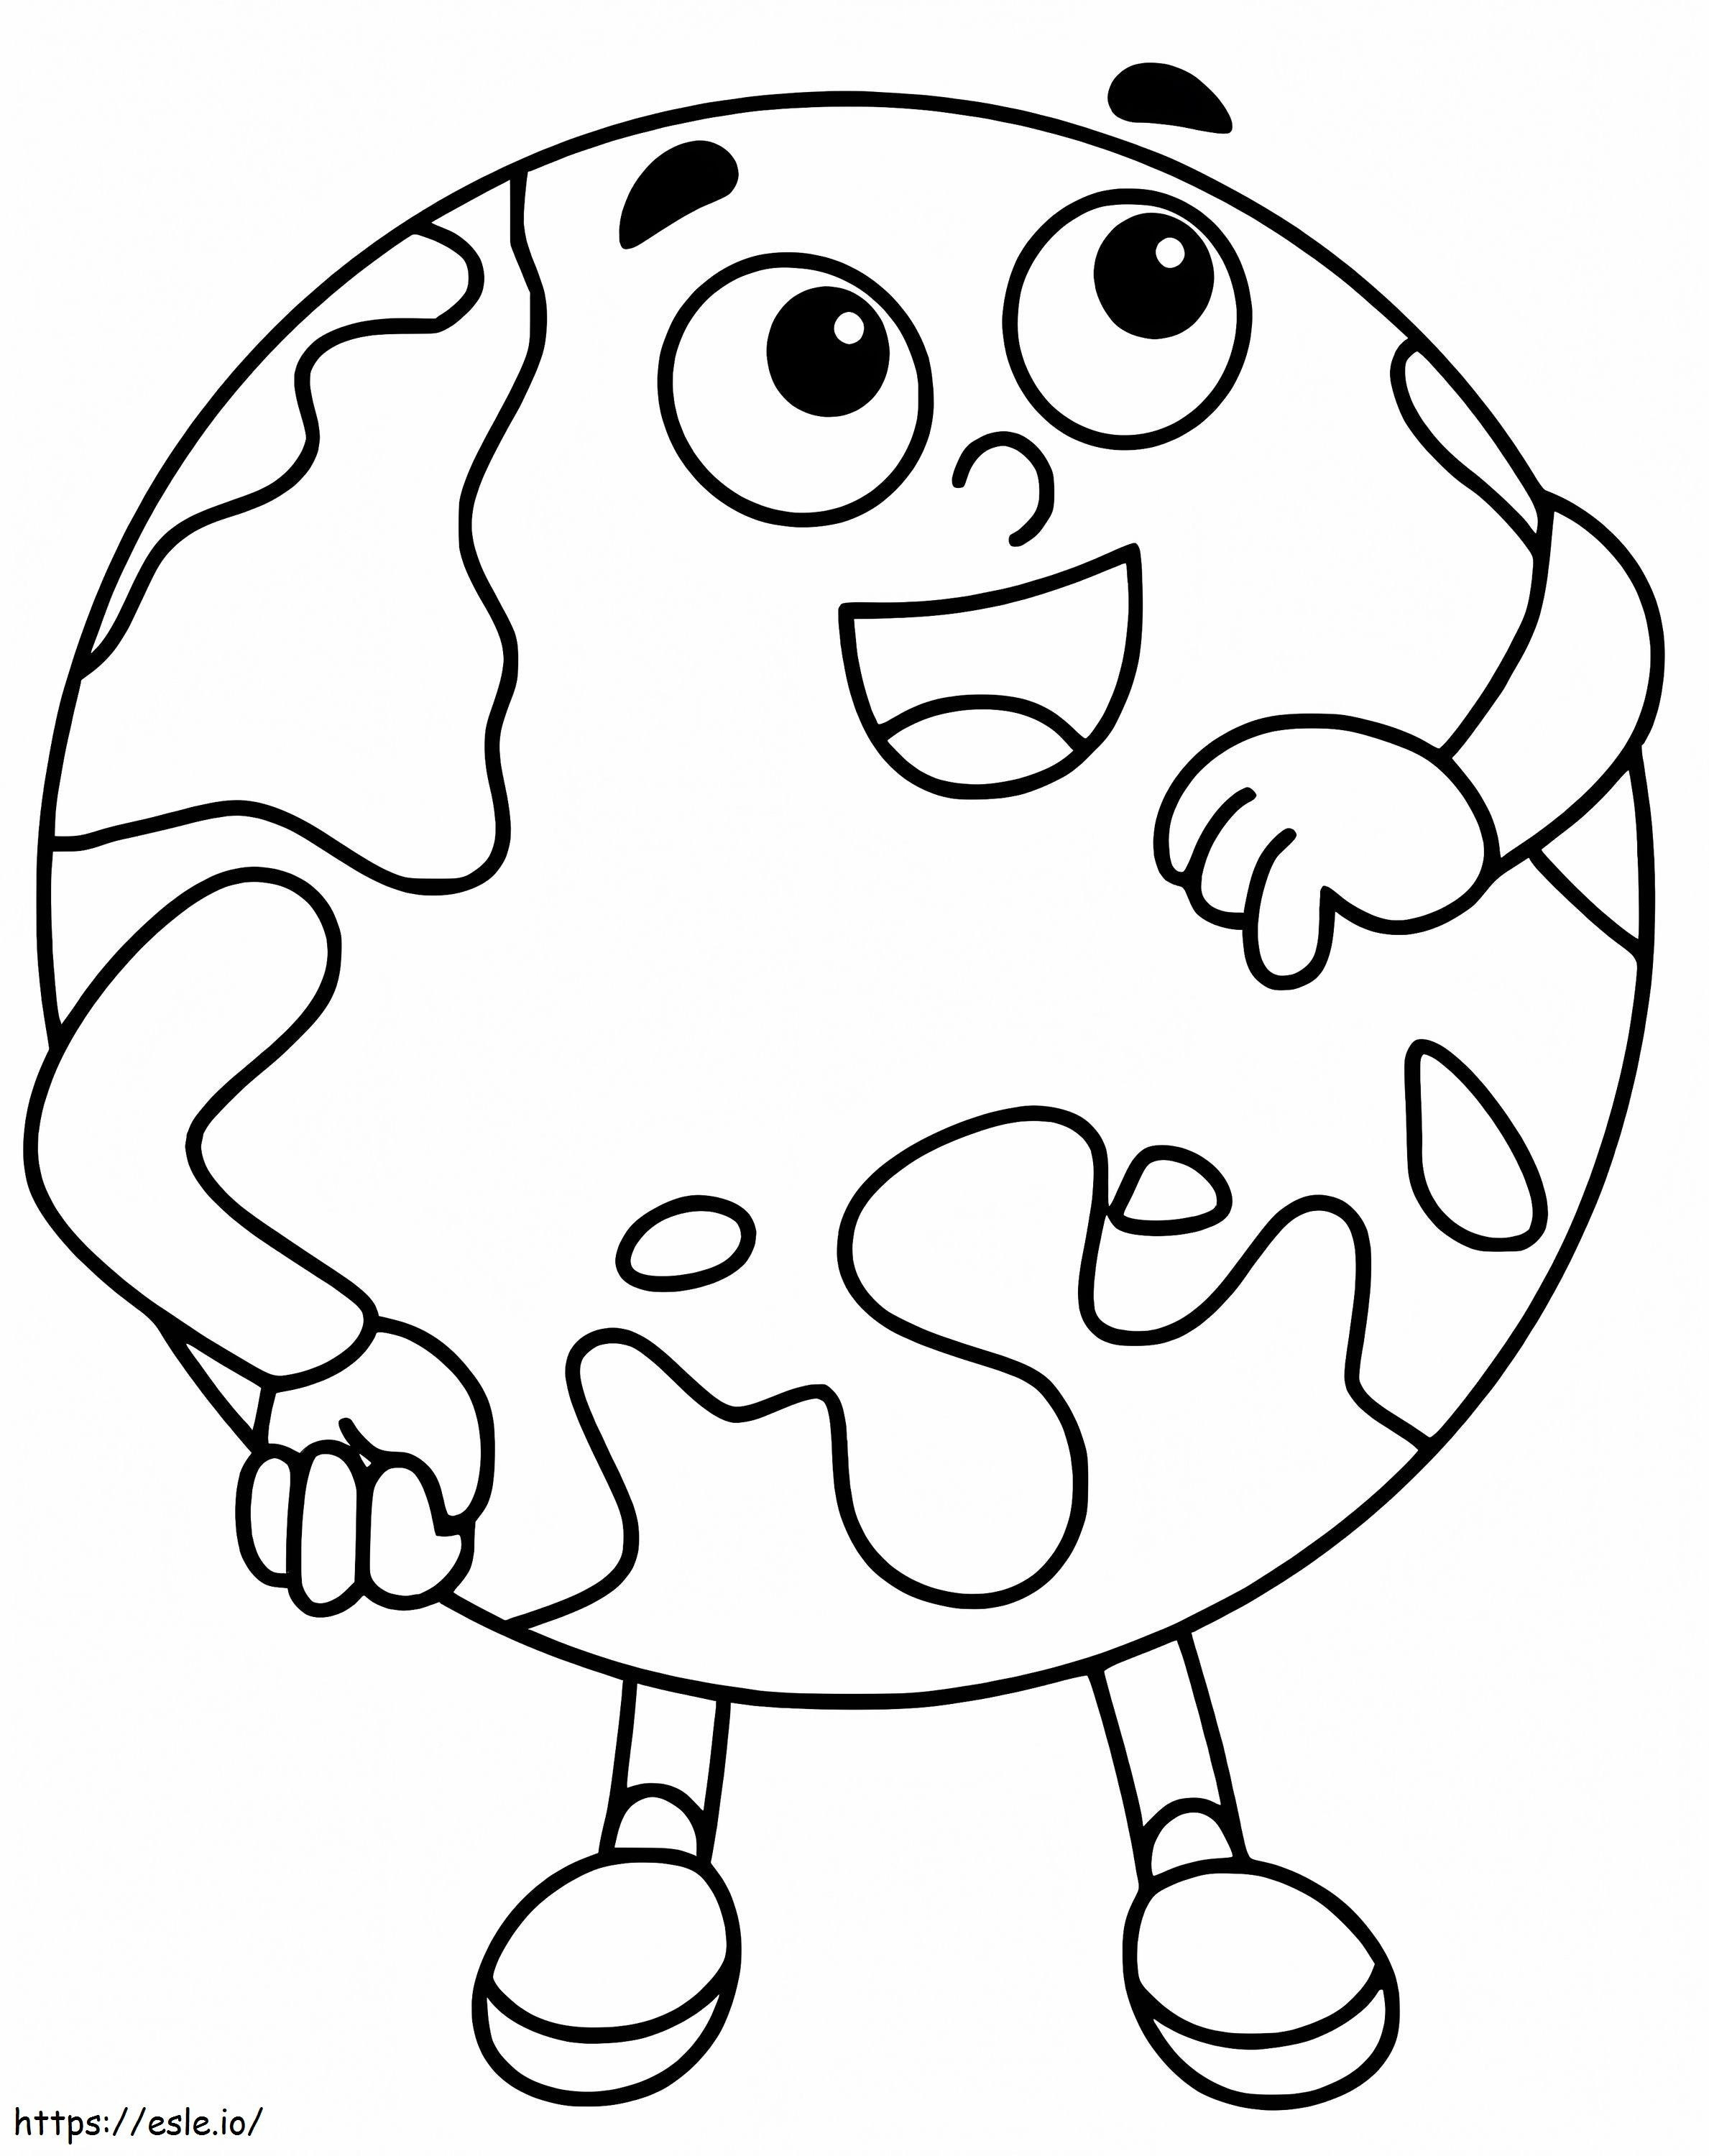 Cartoon Green Earth coloring page